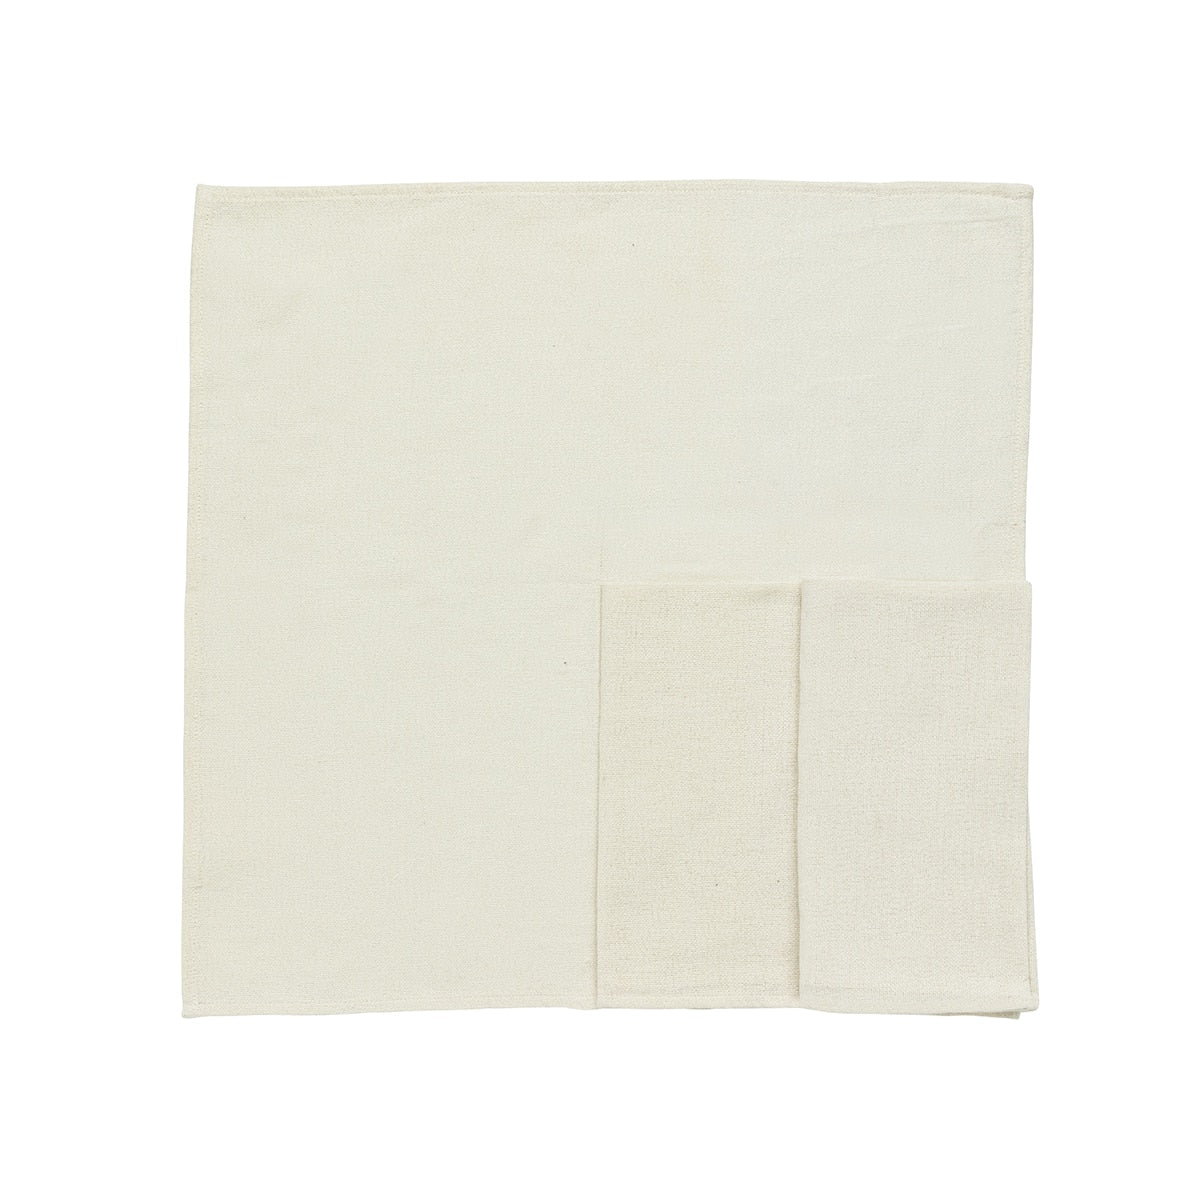 Napkin in thick recycled cotton, hand loomed.